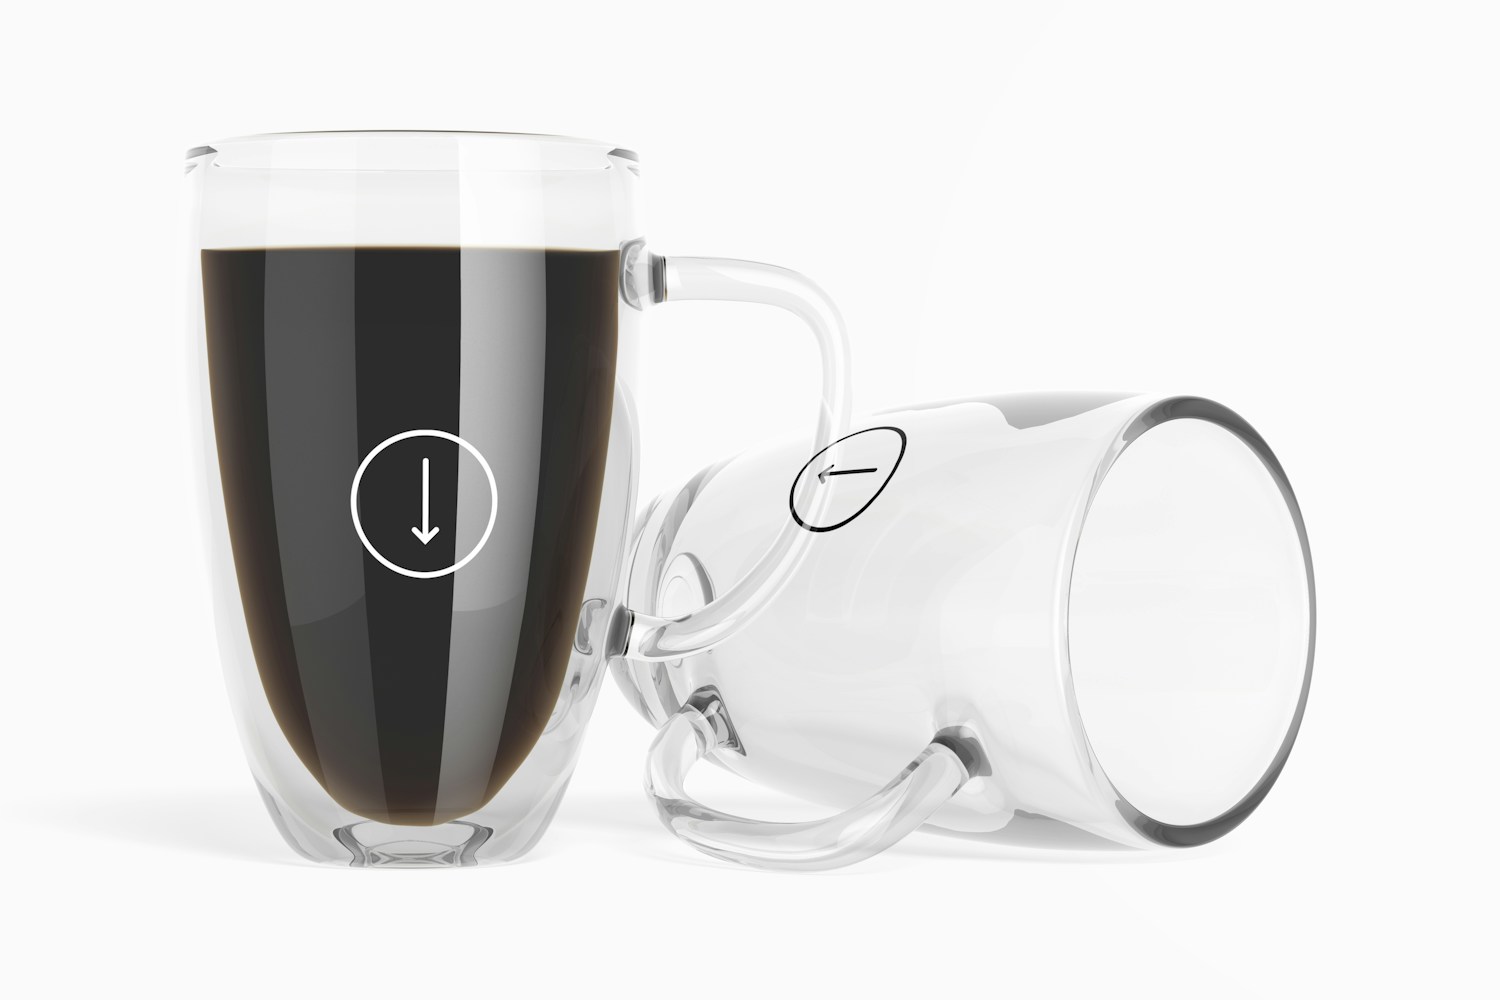 Double Walled Glass Mugs Mockup, Standing and Dropped